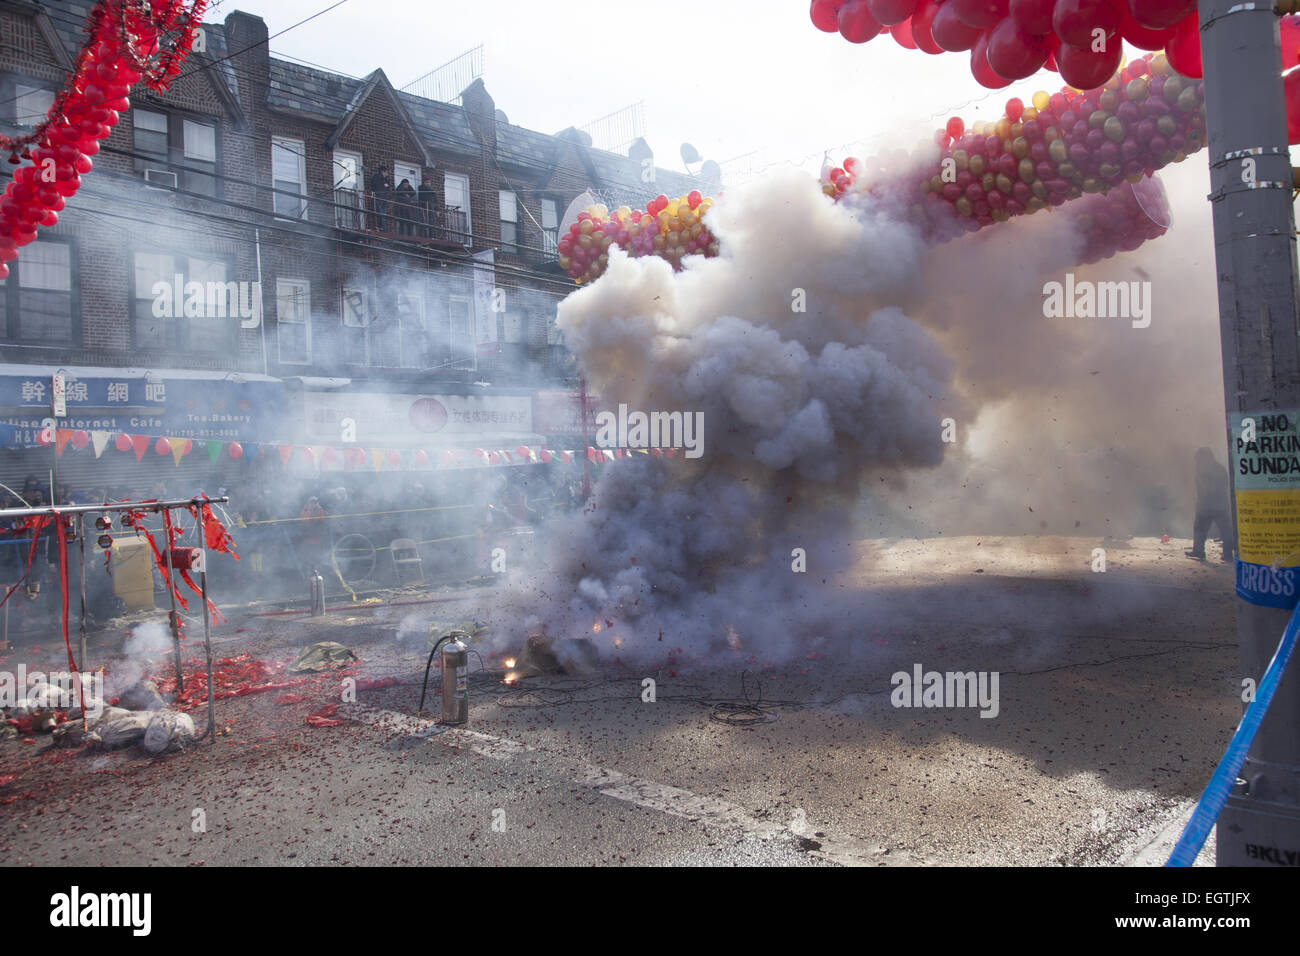 Street becomes enveloped in smoke during the firecracker ceremony on Chinese New Year in the Chinatown section of Brooklyn, NY. Chinese people from the Chinatown/Sunset Park neighborhood of Brooklyn, NY celebrate Chinese New Year  with a parade and festival bringing in The Year Of The Ram, 2015 Stock Photo